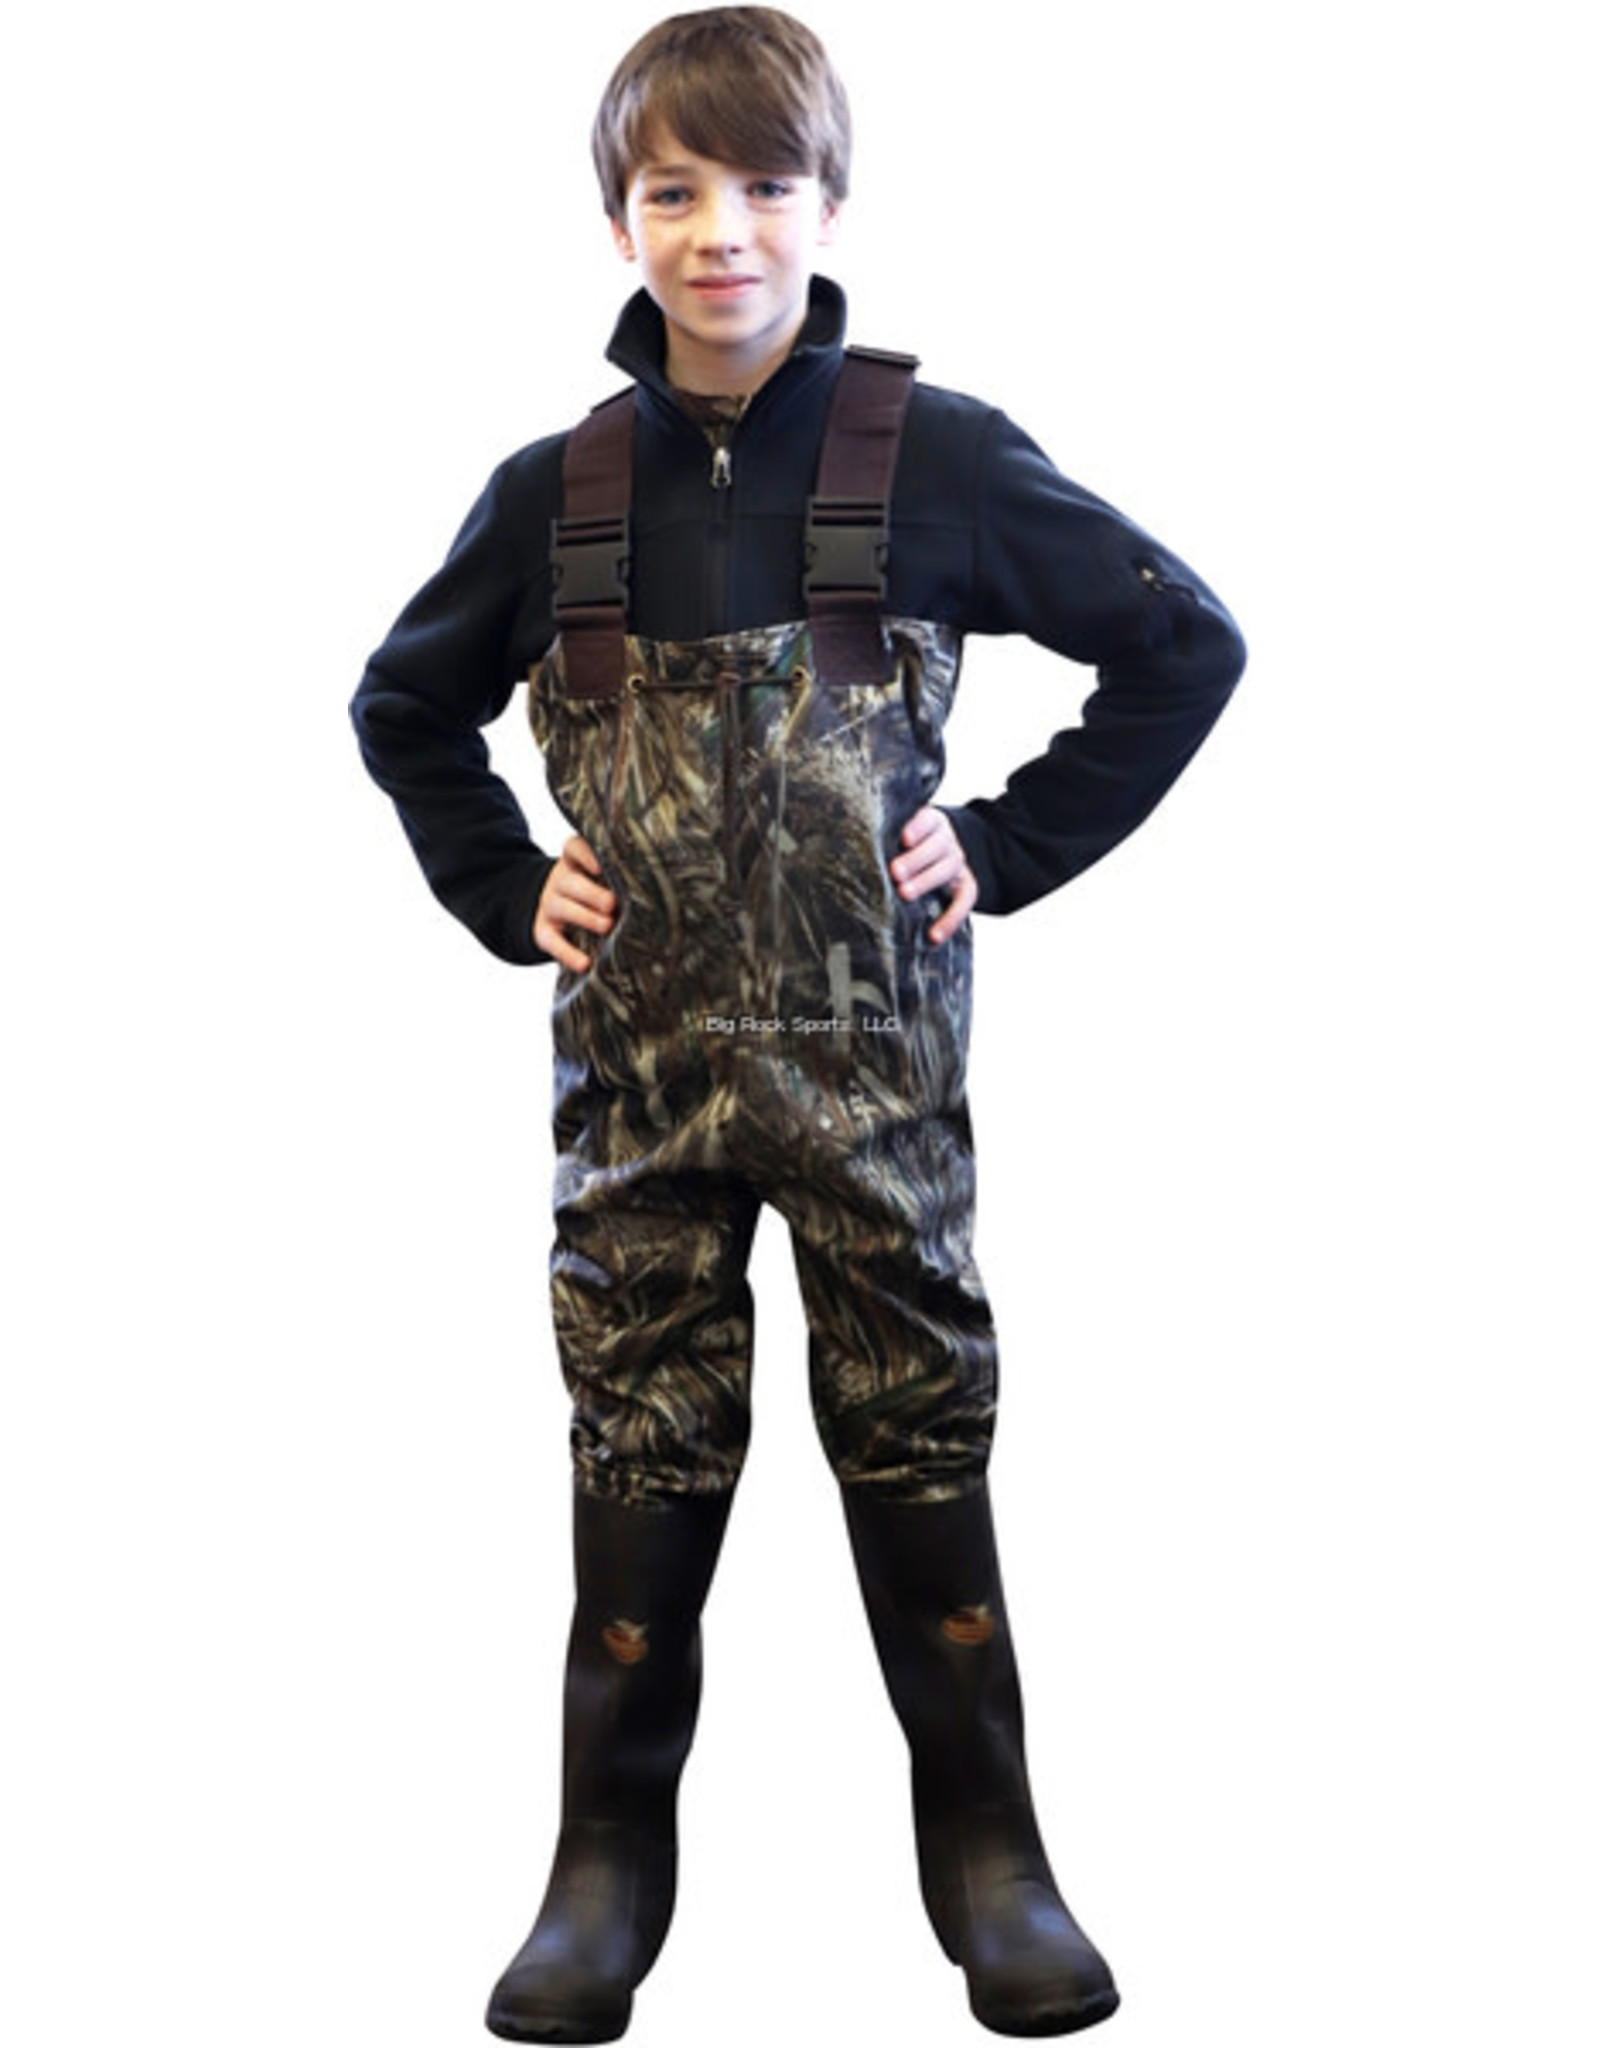 Caddis Wading Systems YOUTH Size 5 - 200gr - Caddis Wading Systems MAX-5 Camo 2-Ply Youth Chest Wader